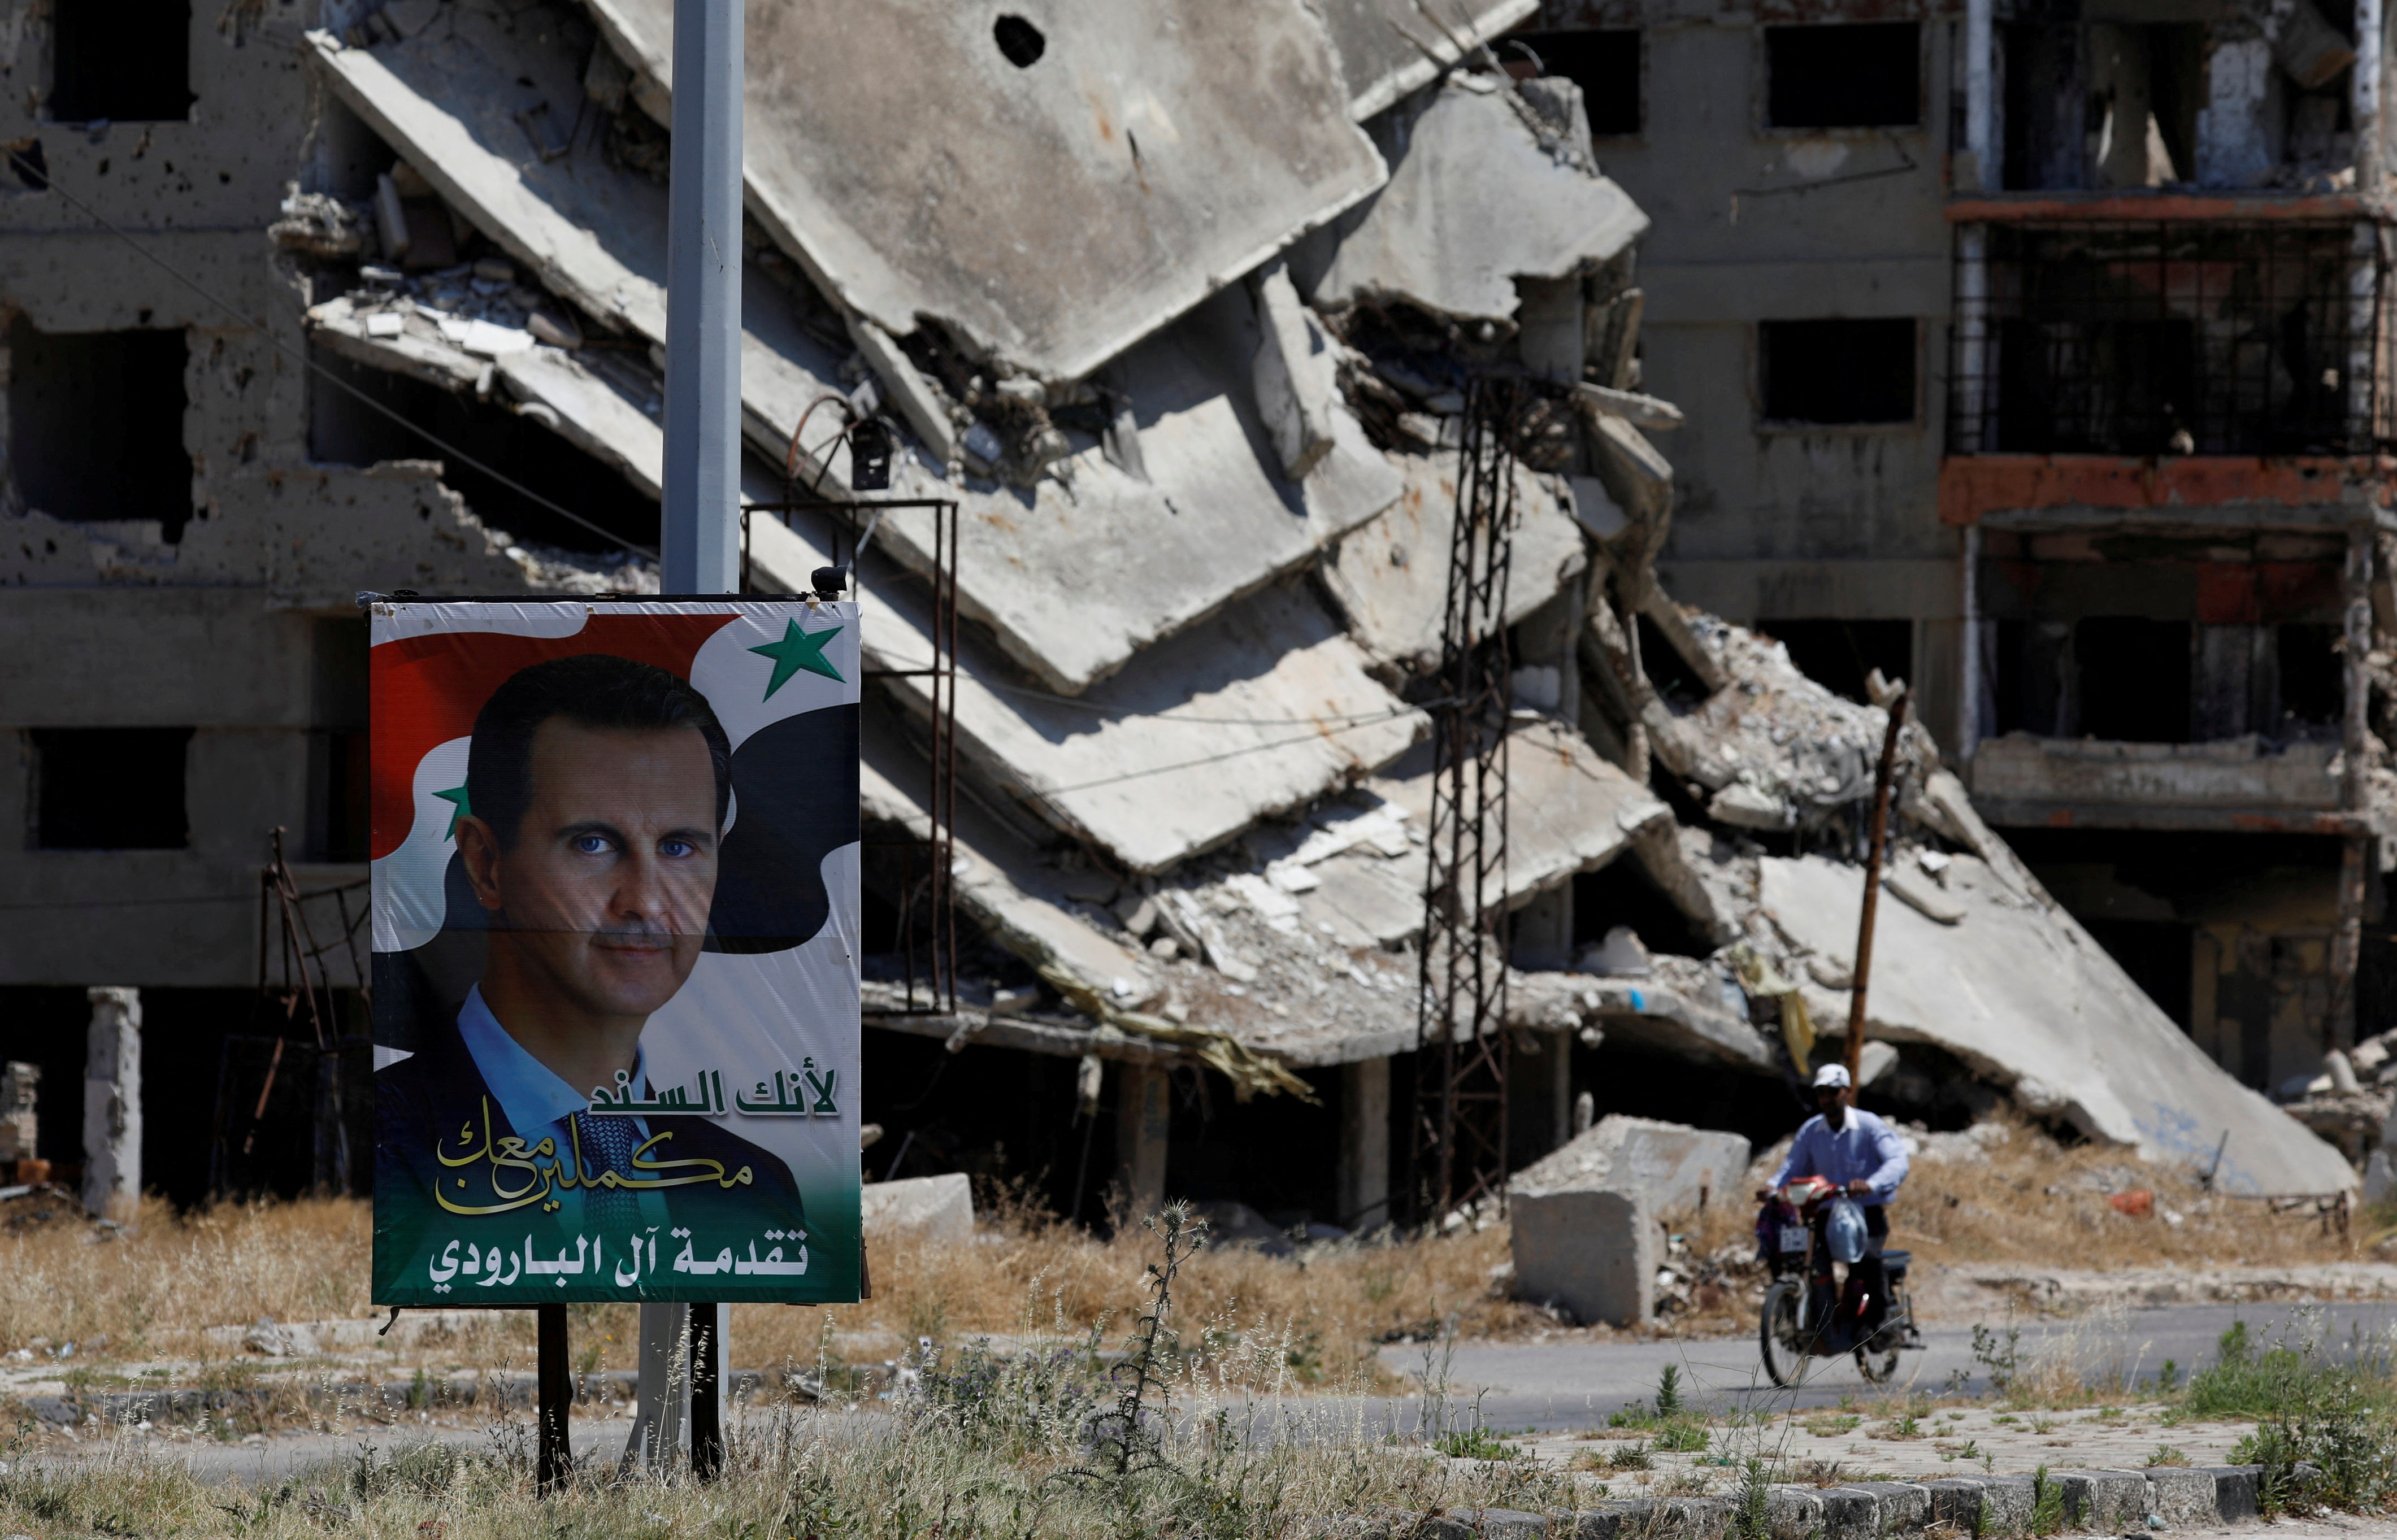 A poster depciting Syria's President Bashar al-Assad is pictured in front of damaged buildings in Homs